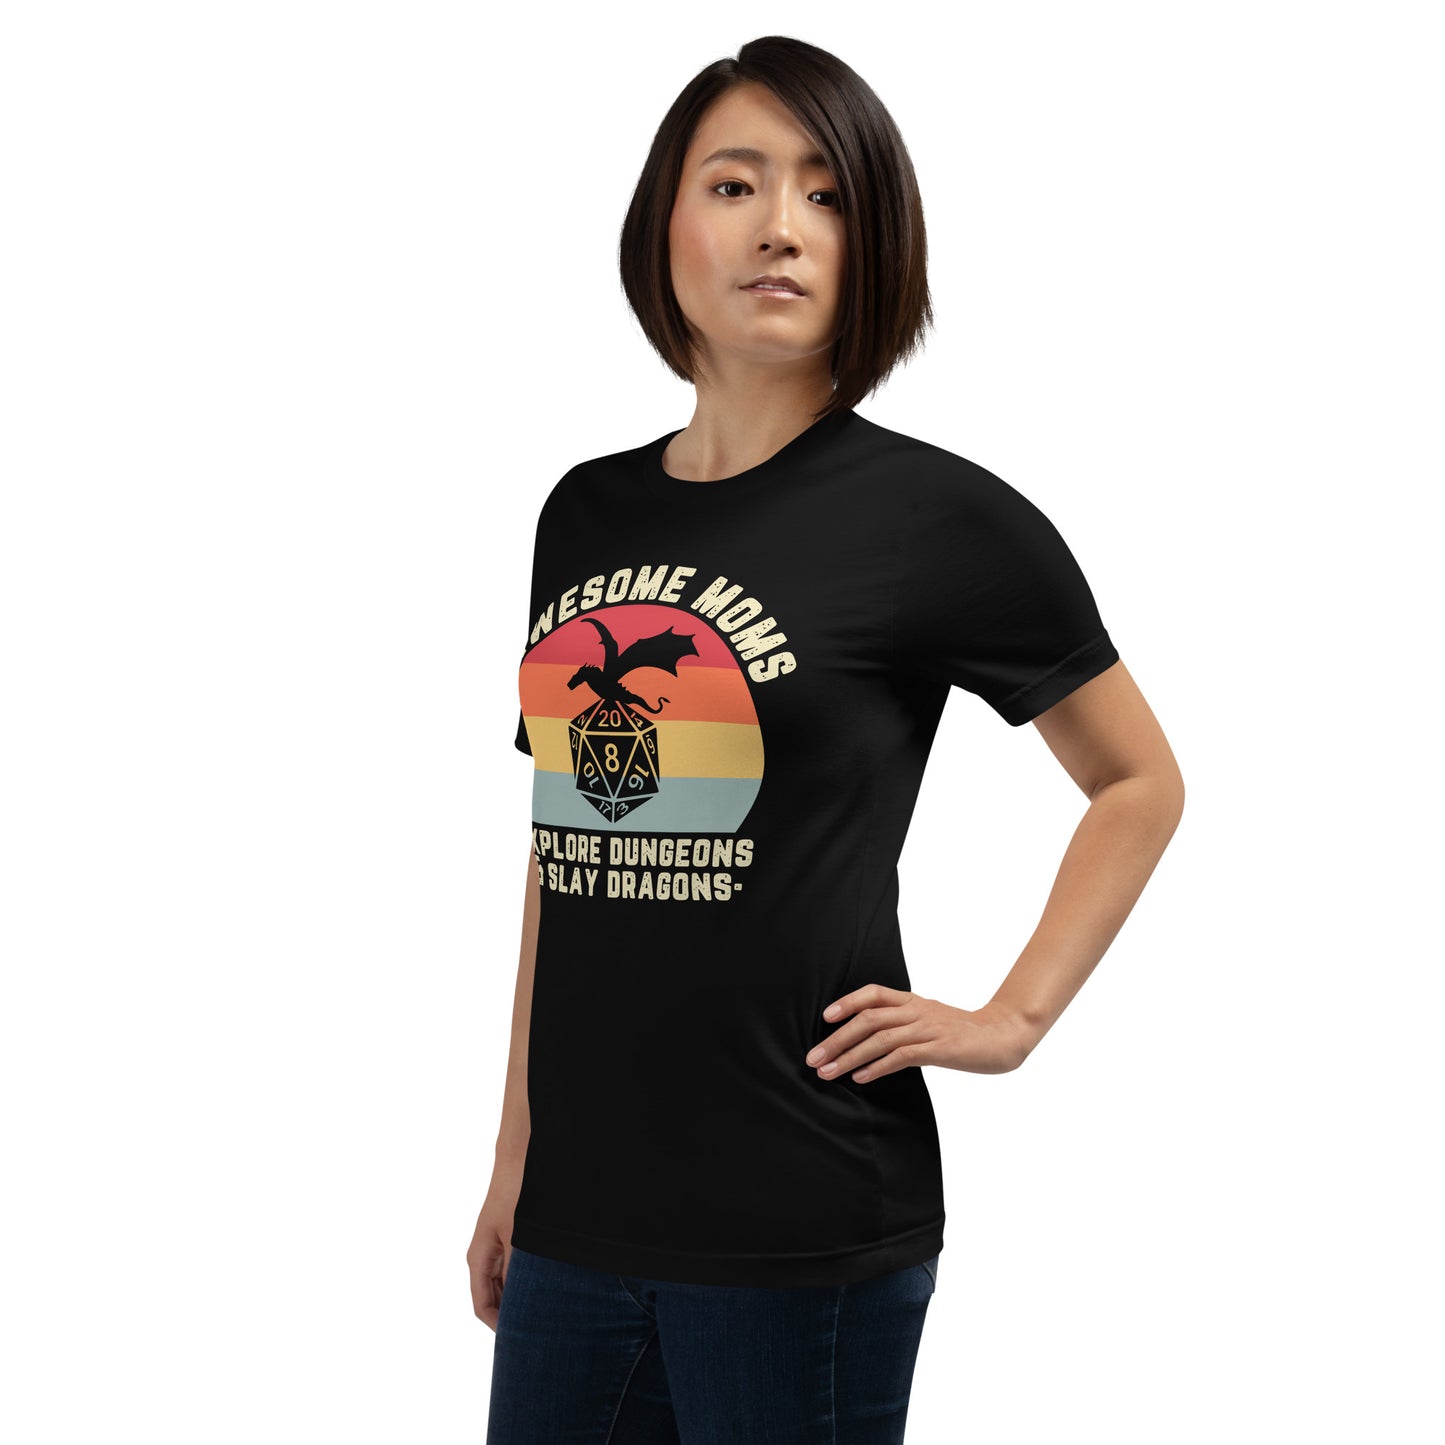 Awesome Moms Explore Dungeons and Slay Dragons | Casual Unisex Tee | Gamer Mom Shirt